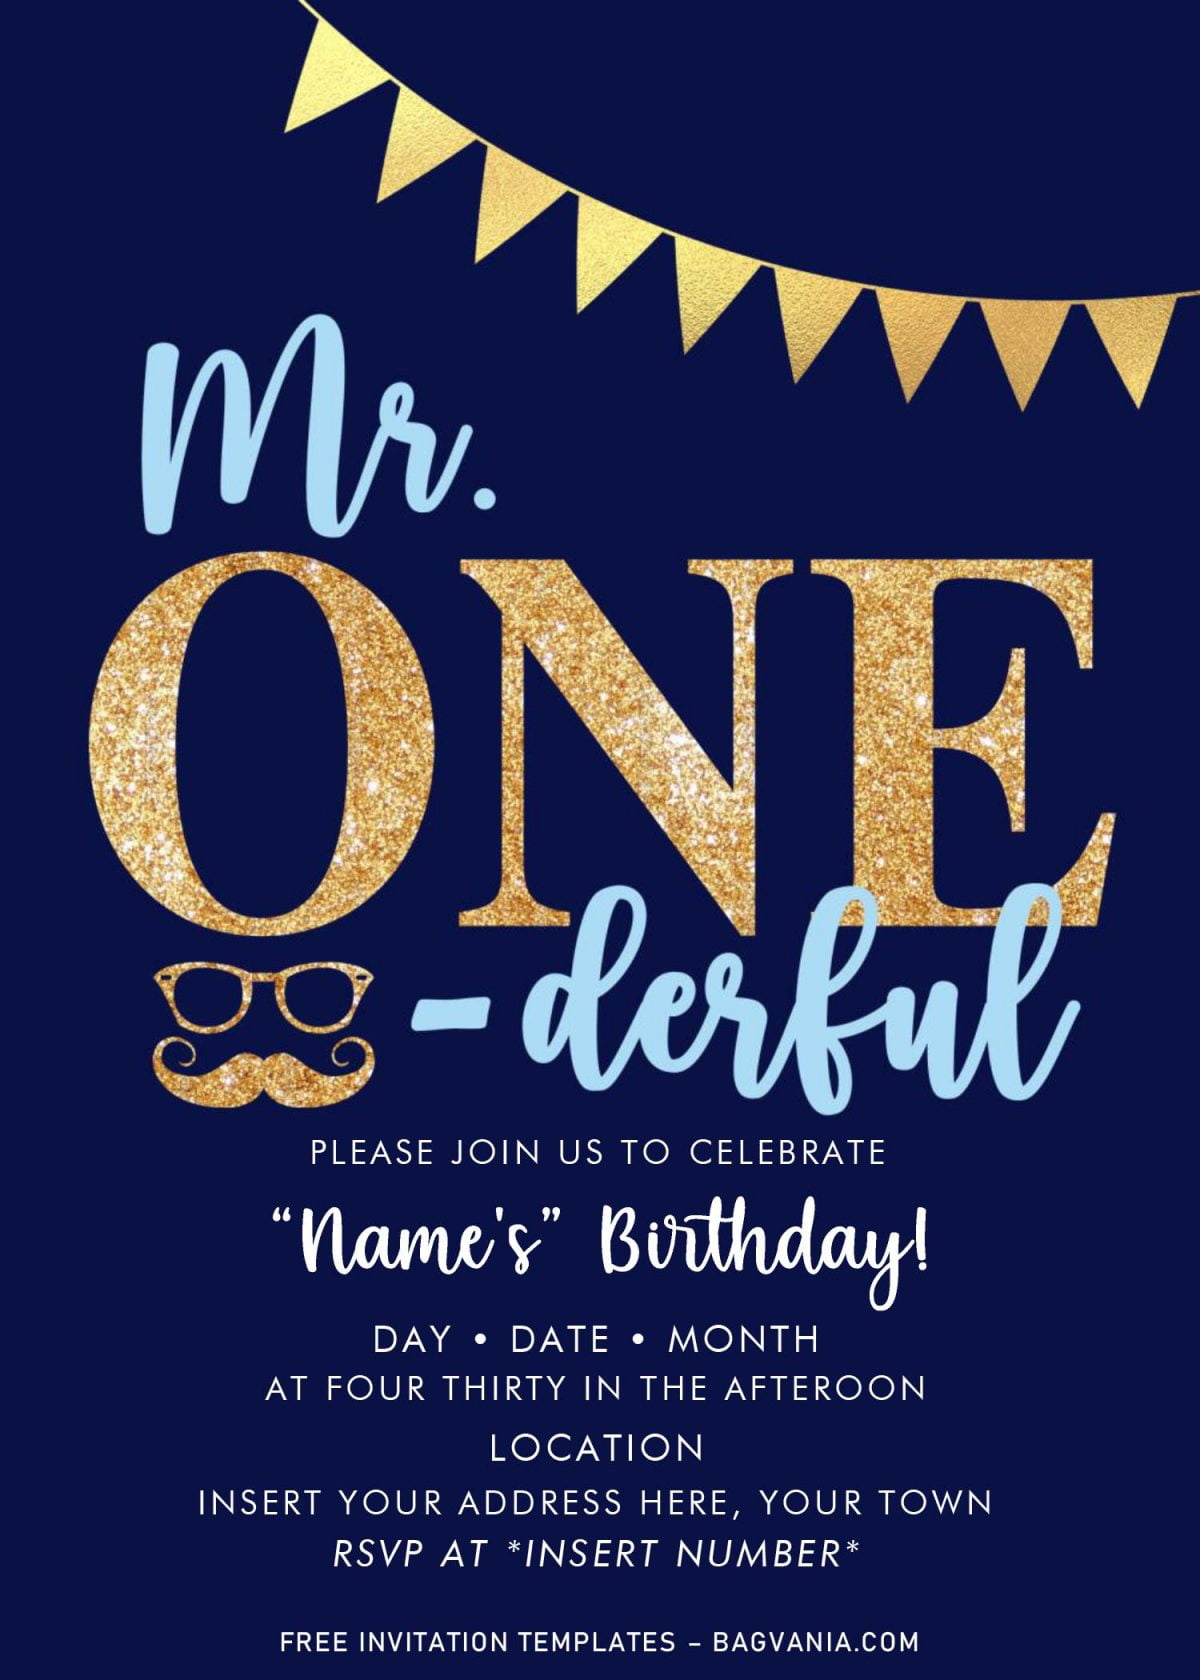 Free Mr. Onederful Birthday Party Invitation Templates For Word and has navy and gold combination